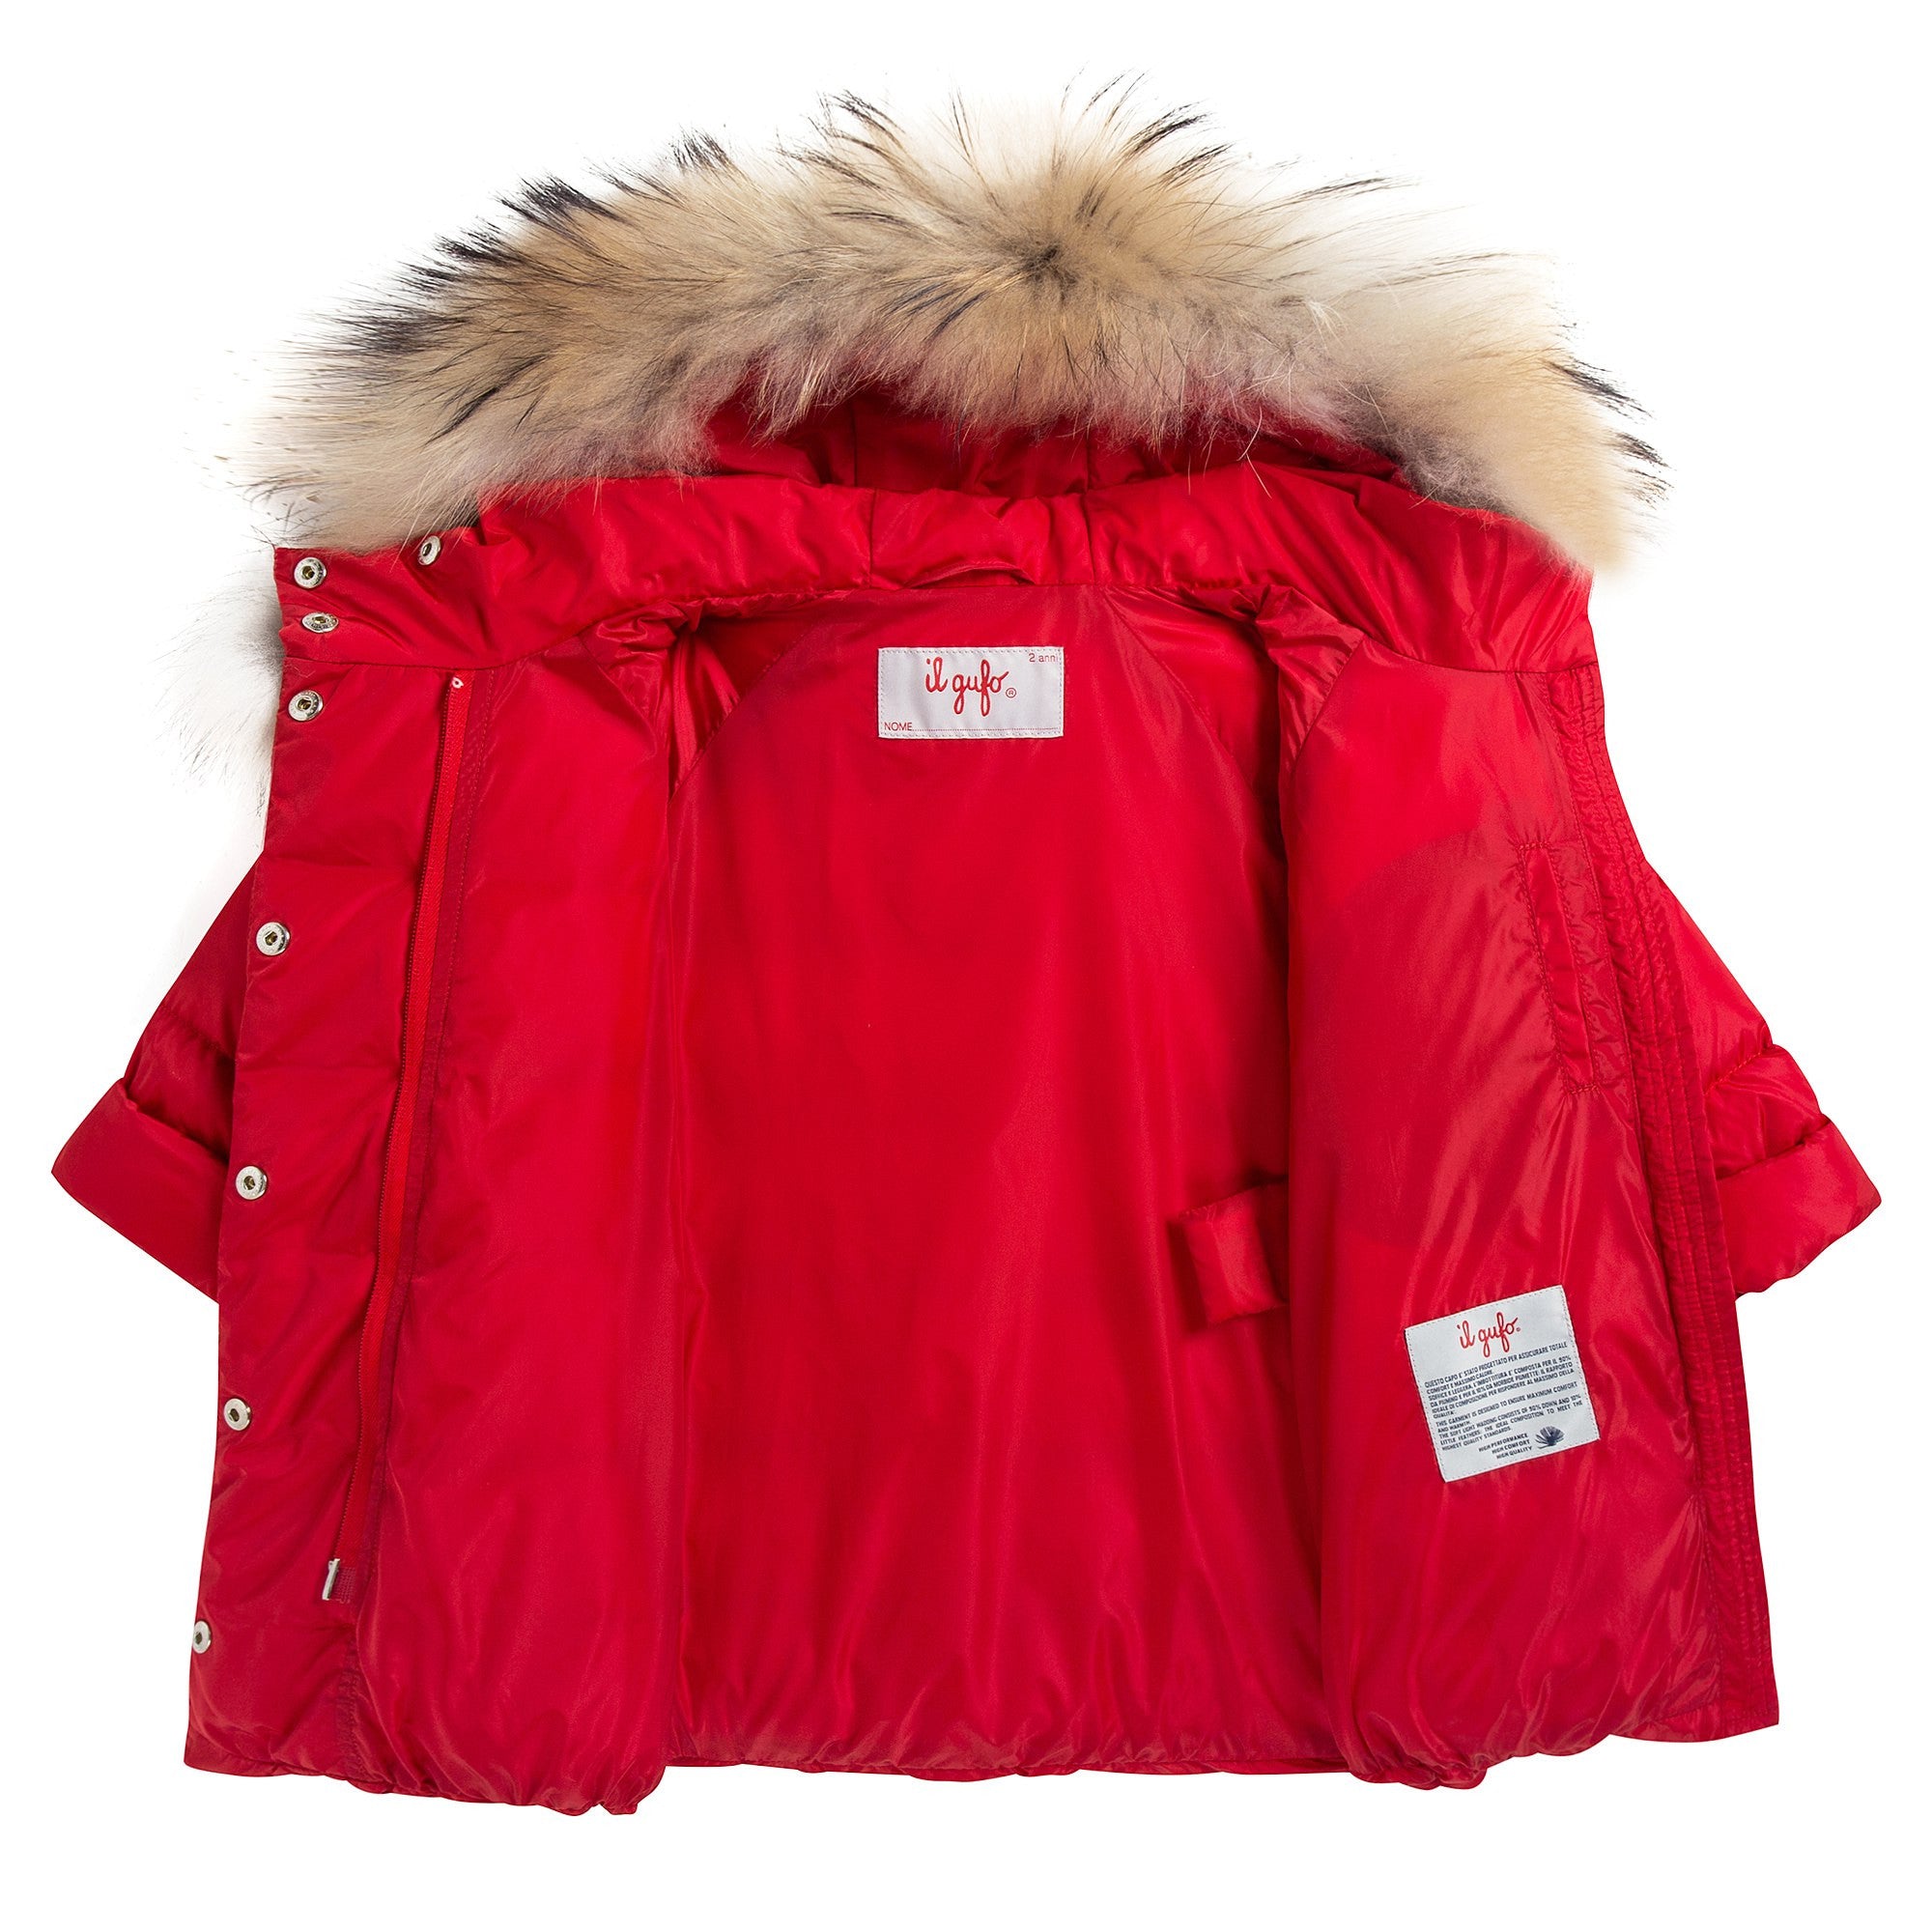 Girls Red Down Padded Coat With Fur